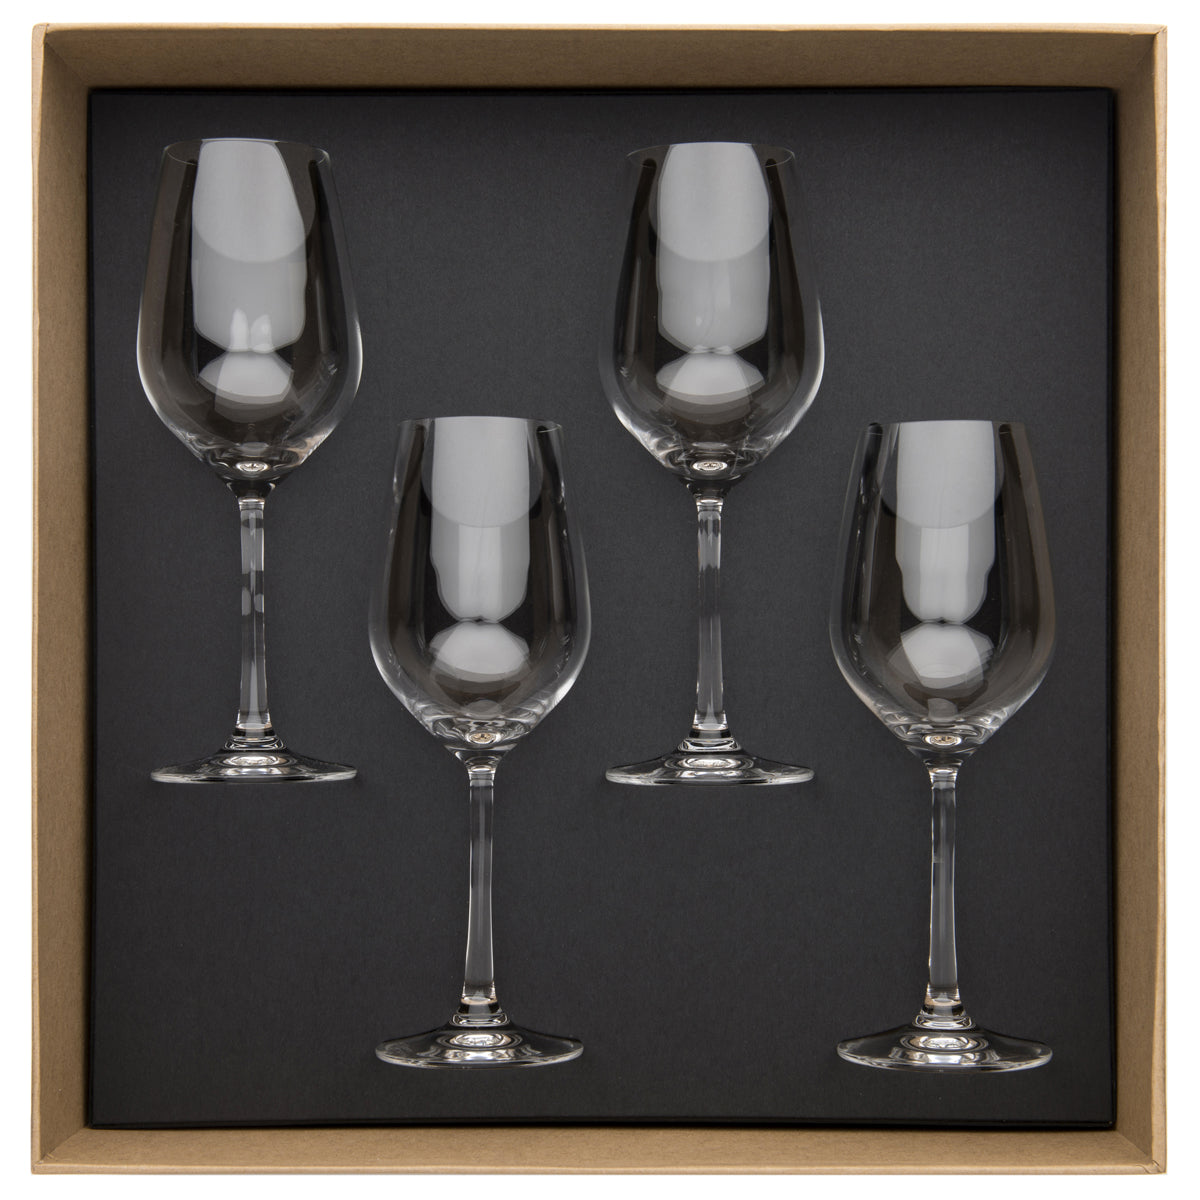 Caterer's Box Champagne Glass - Set of 12